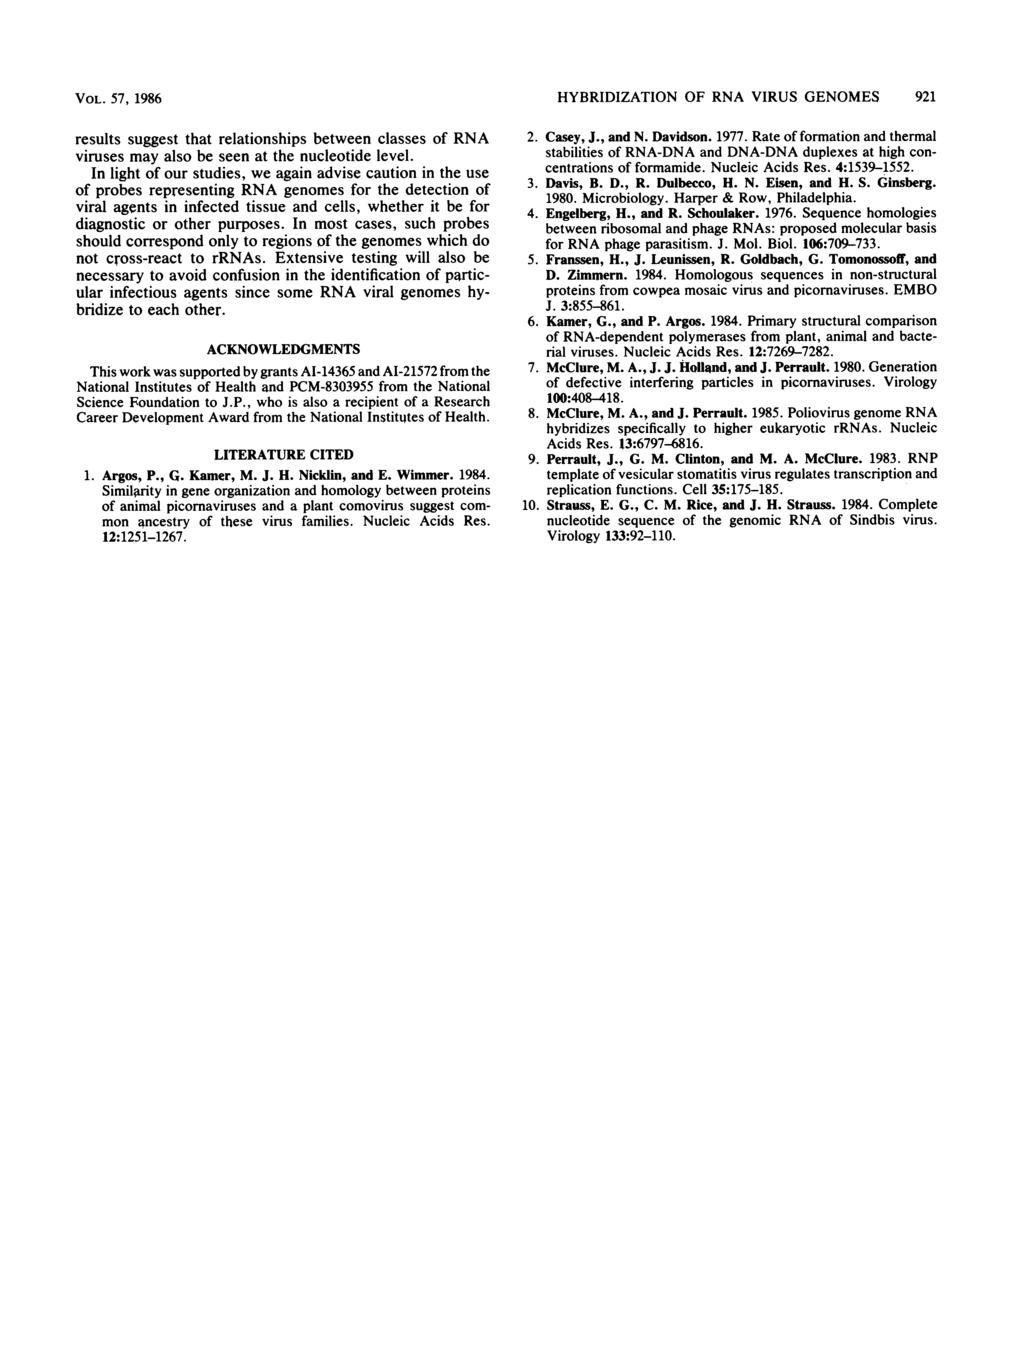 VOL. 57, 1986 results suggest that relationships between classes of RNA viruses may also be seen at the nucleotide level.